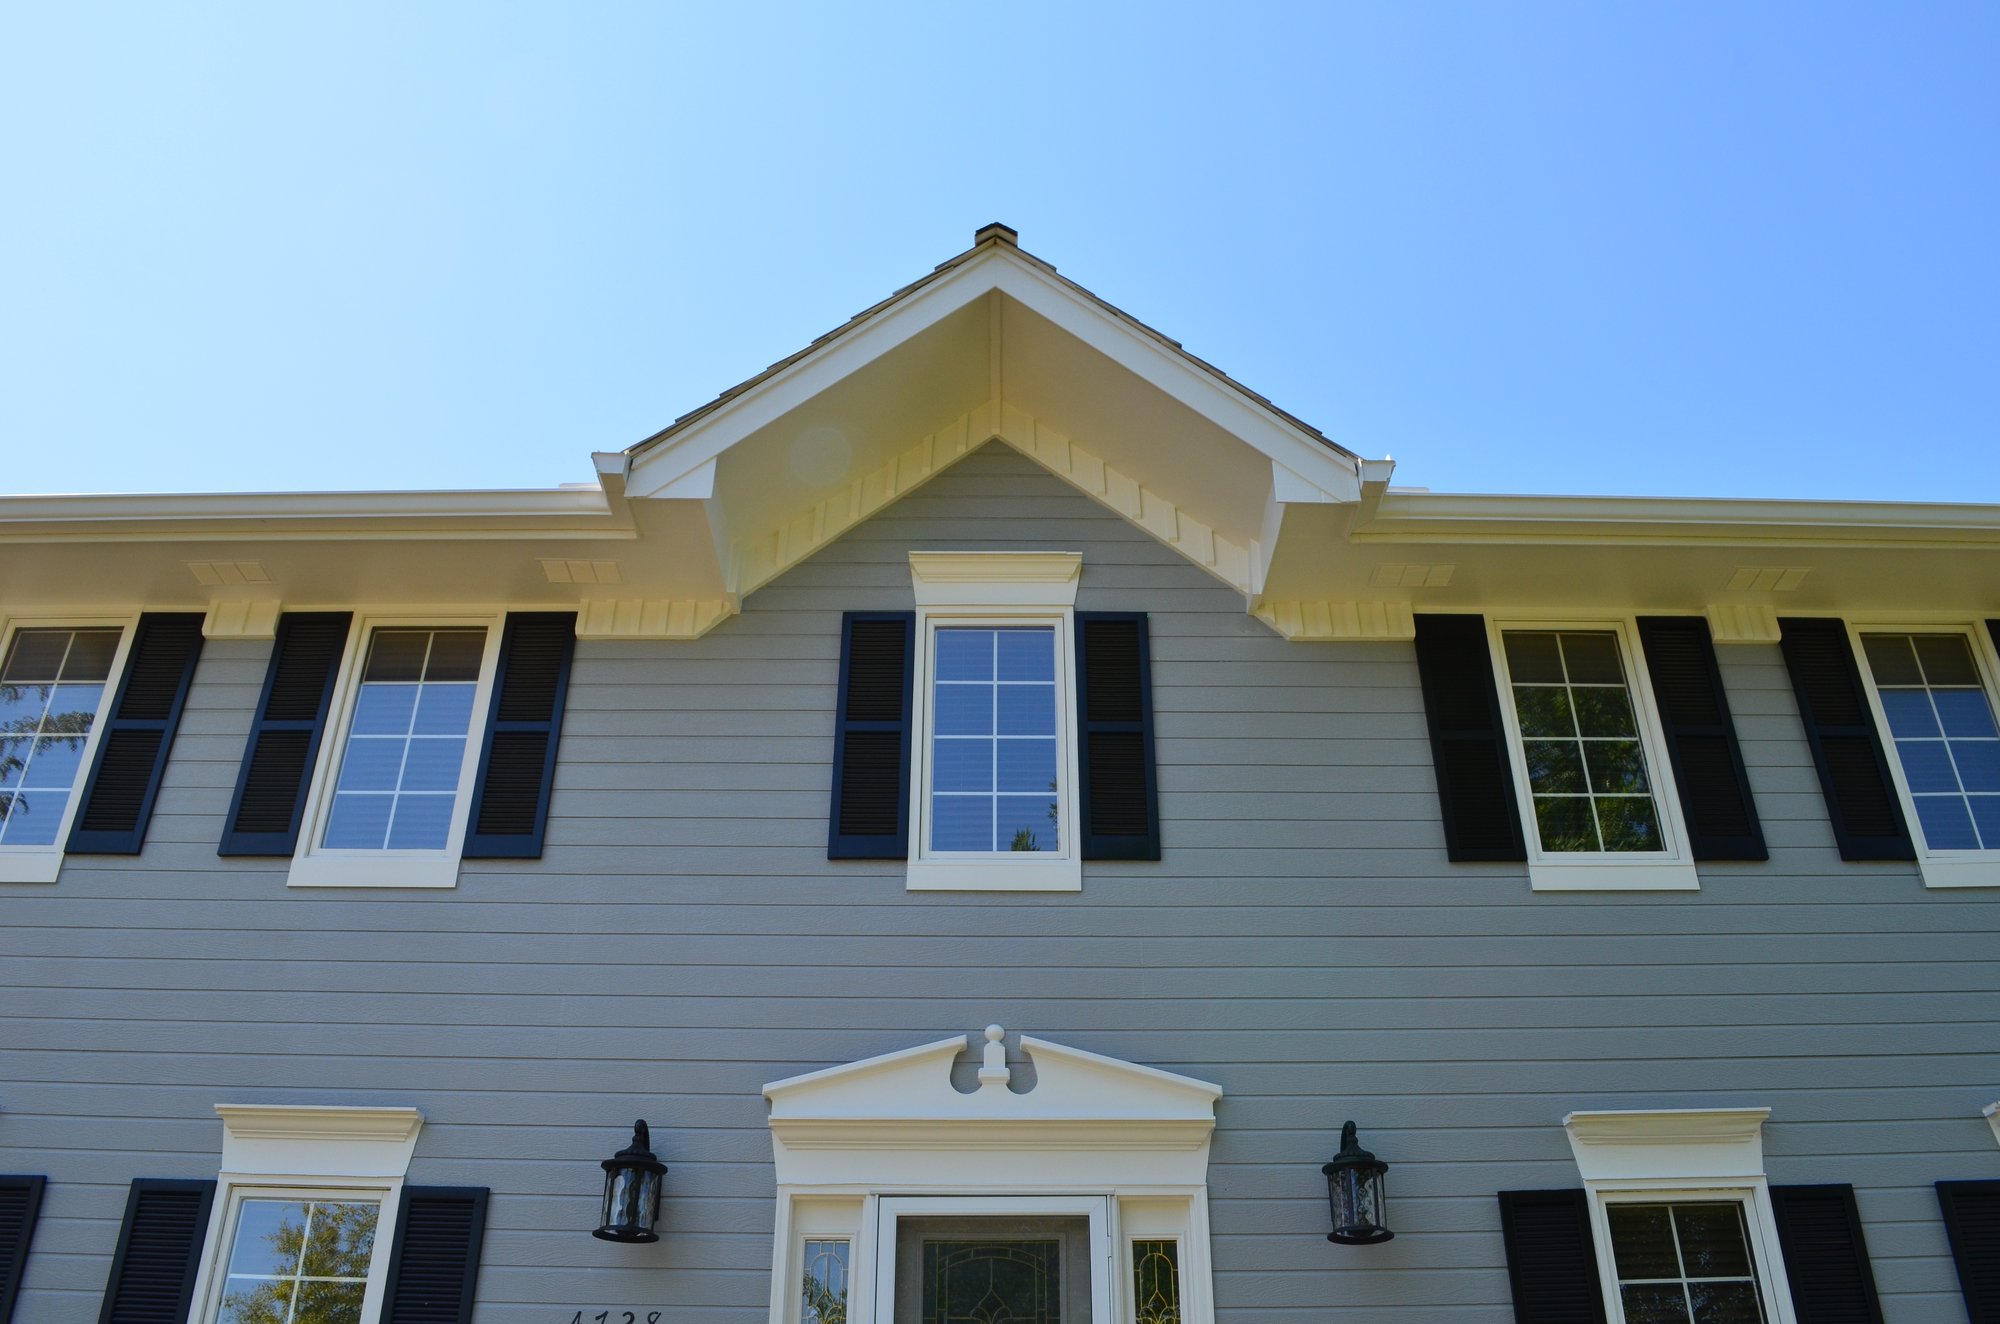 View looking up at the front of a light blue home with darker shutters, in front of the bright blue sky.